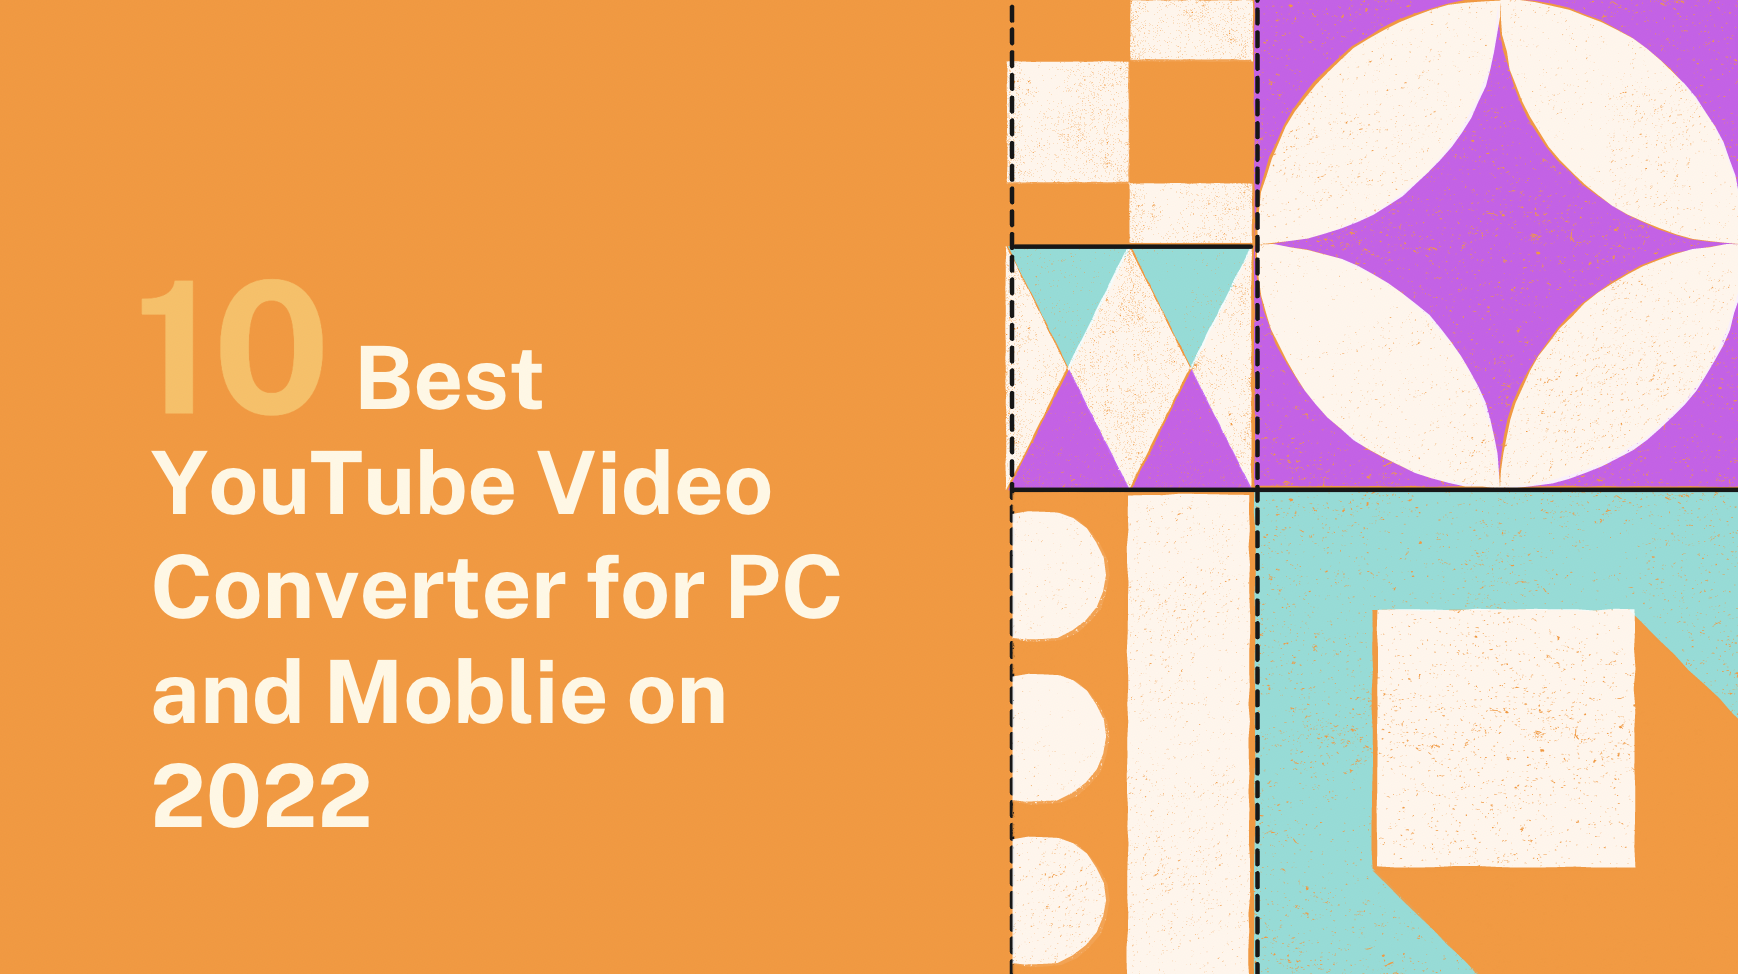 10+ Best YouTube Video Converter for PC and Moblie on 2022